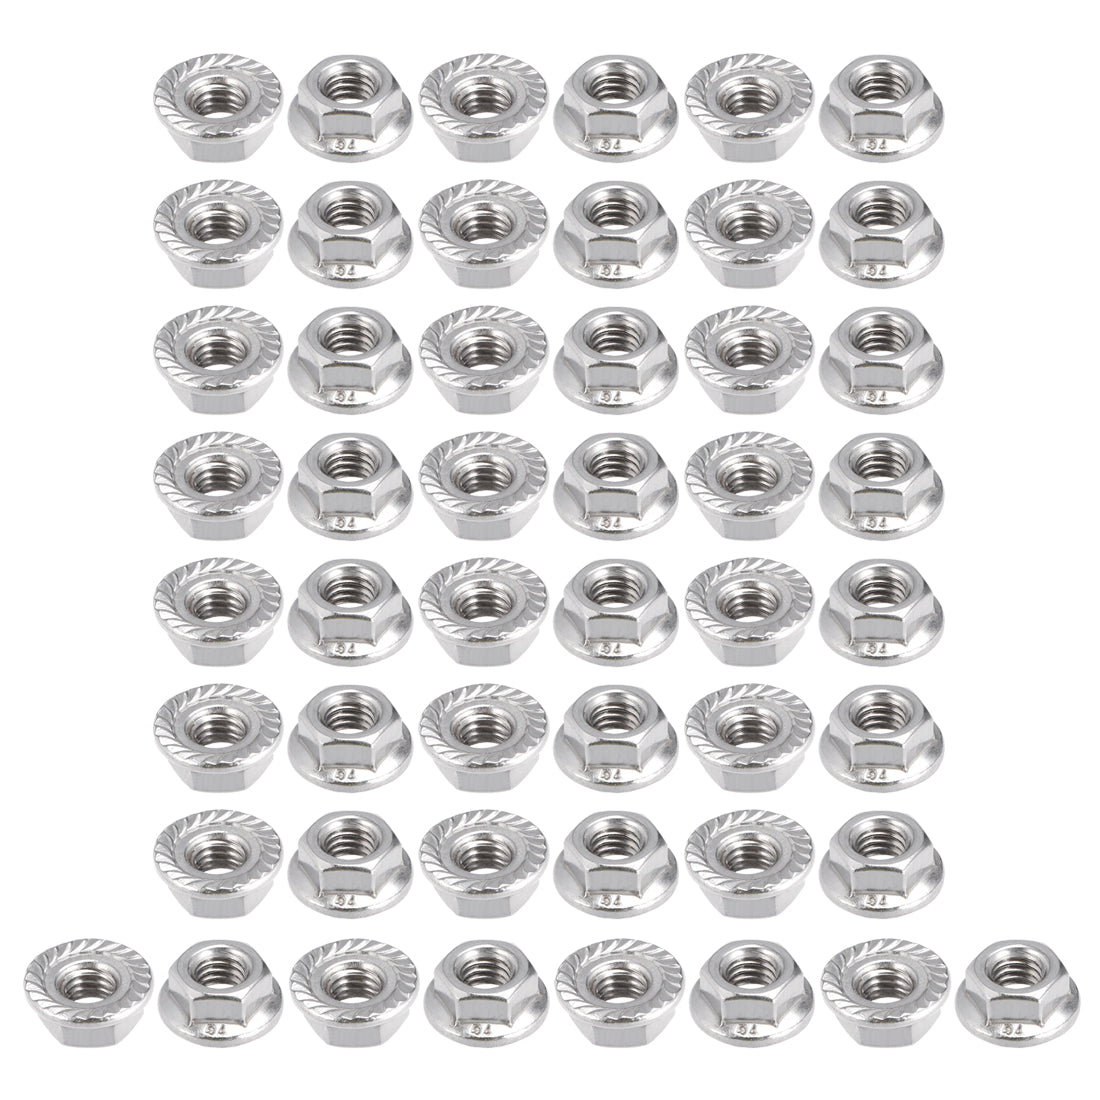 Uxcell Uxcell M6 Serrated Flange Hex Lock Nuts, 201 Stainless Steel, 50 Pcs